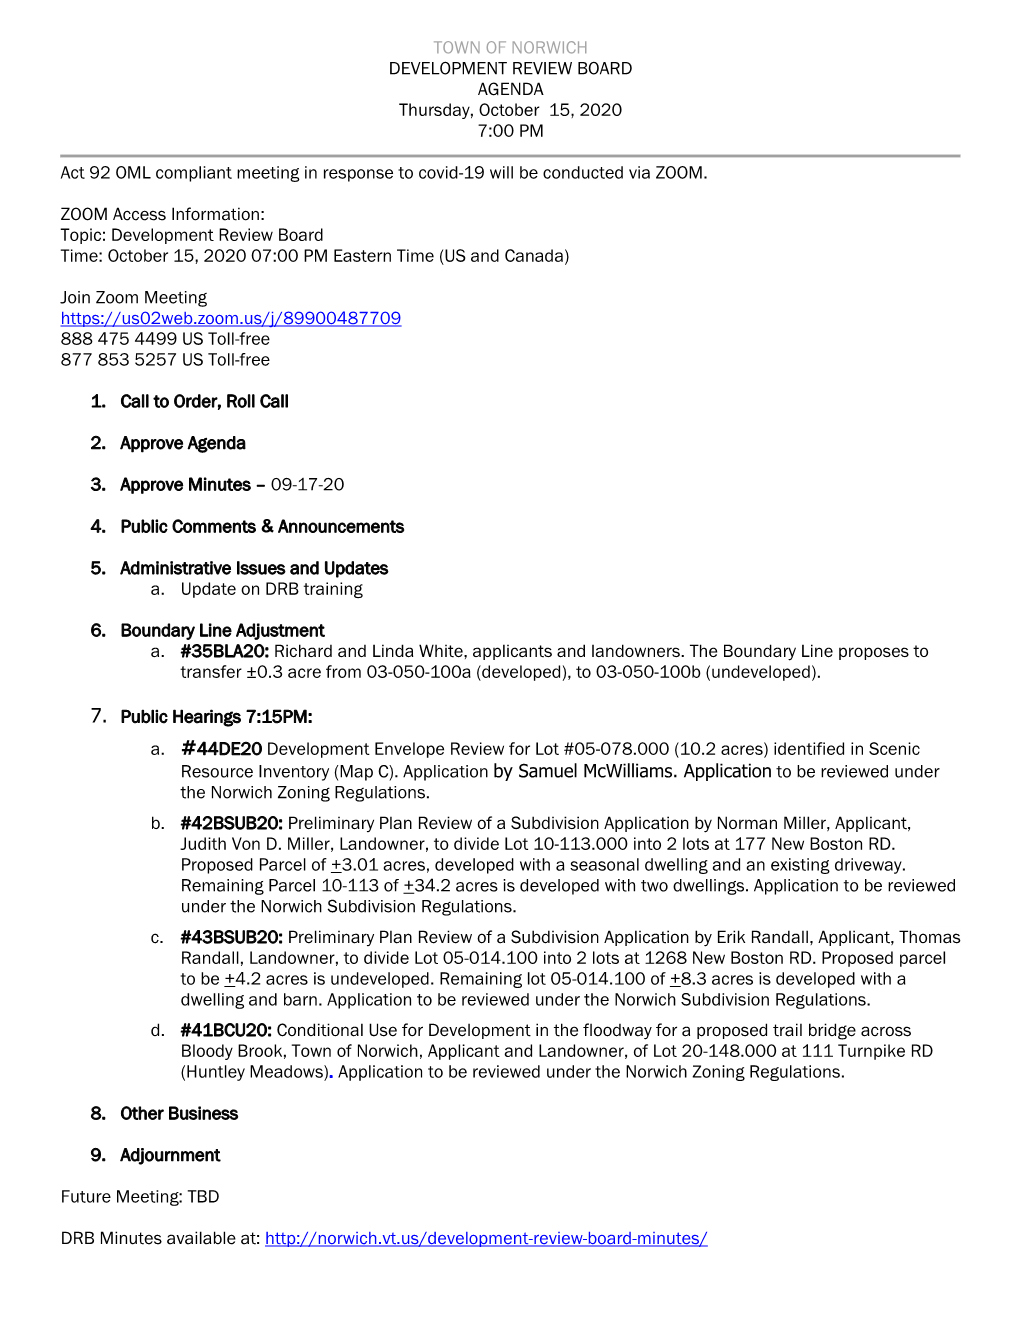 TOWN of NORWICH DEVELOPMENT REVIEW BOARD AGENDA Thursday, October 15, 2020 7:00 PM